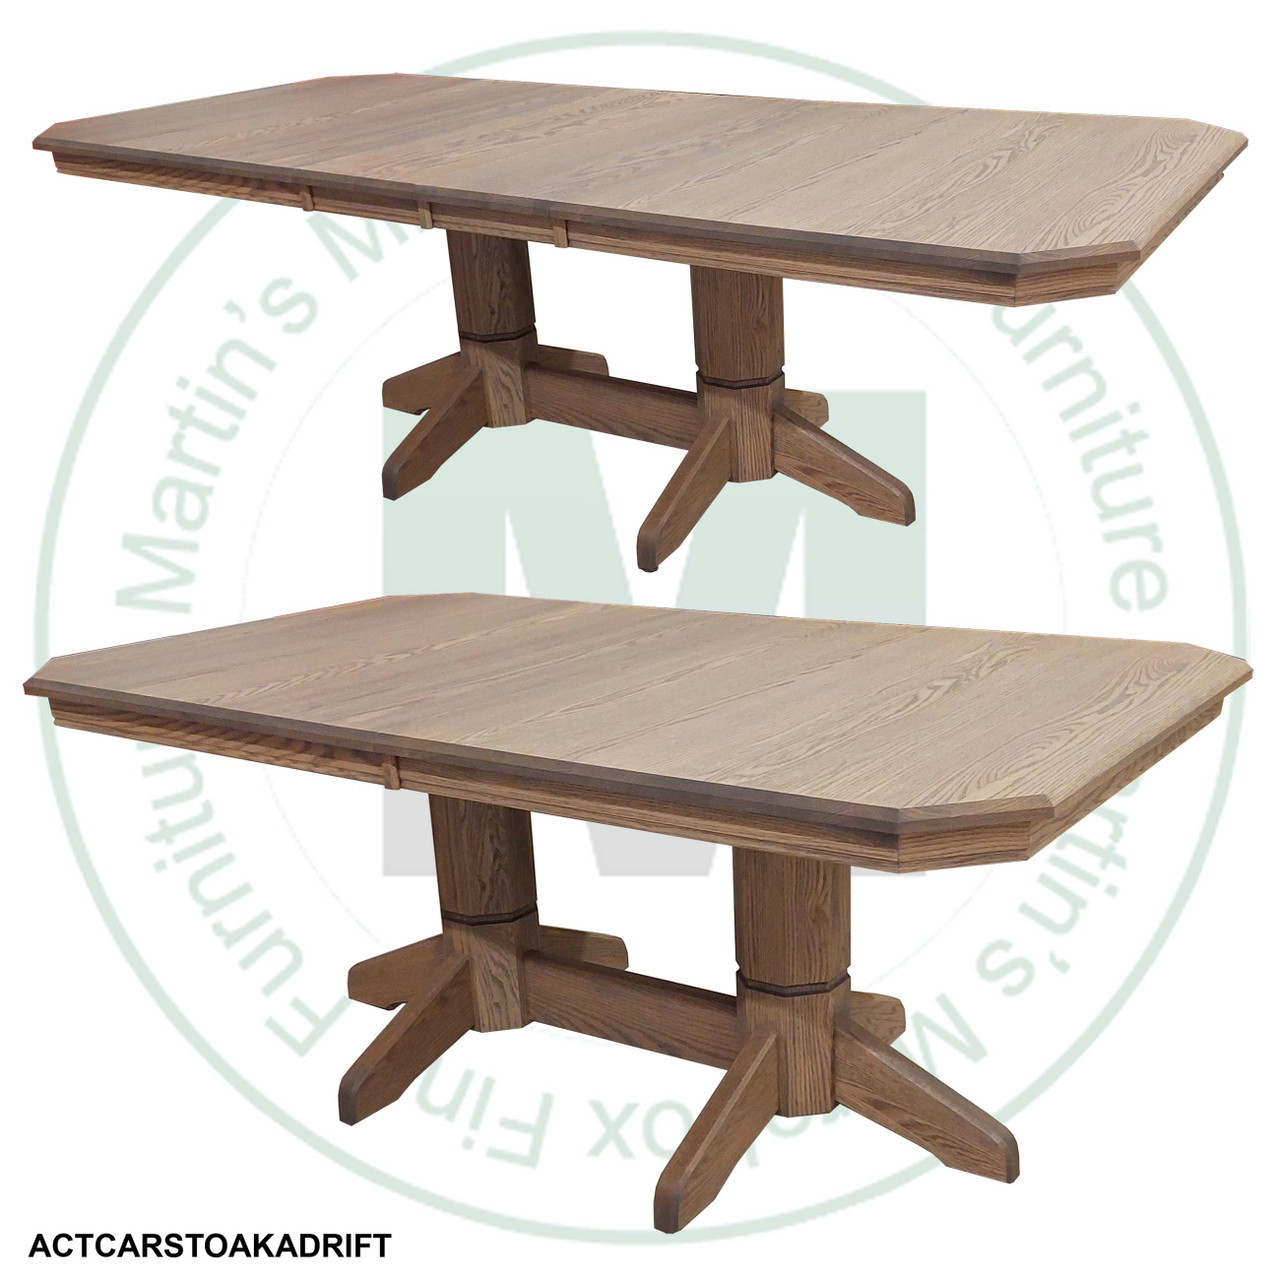 Maple Urban Classic Double Pedestal Table 42''D x 96''W x 30''H With 2 - 12'' Leaves